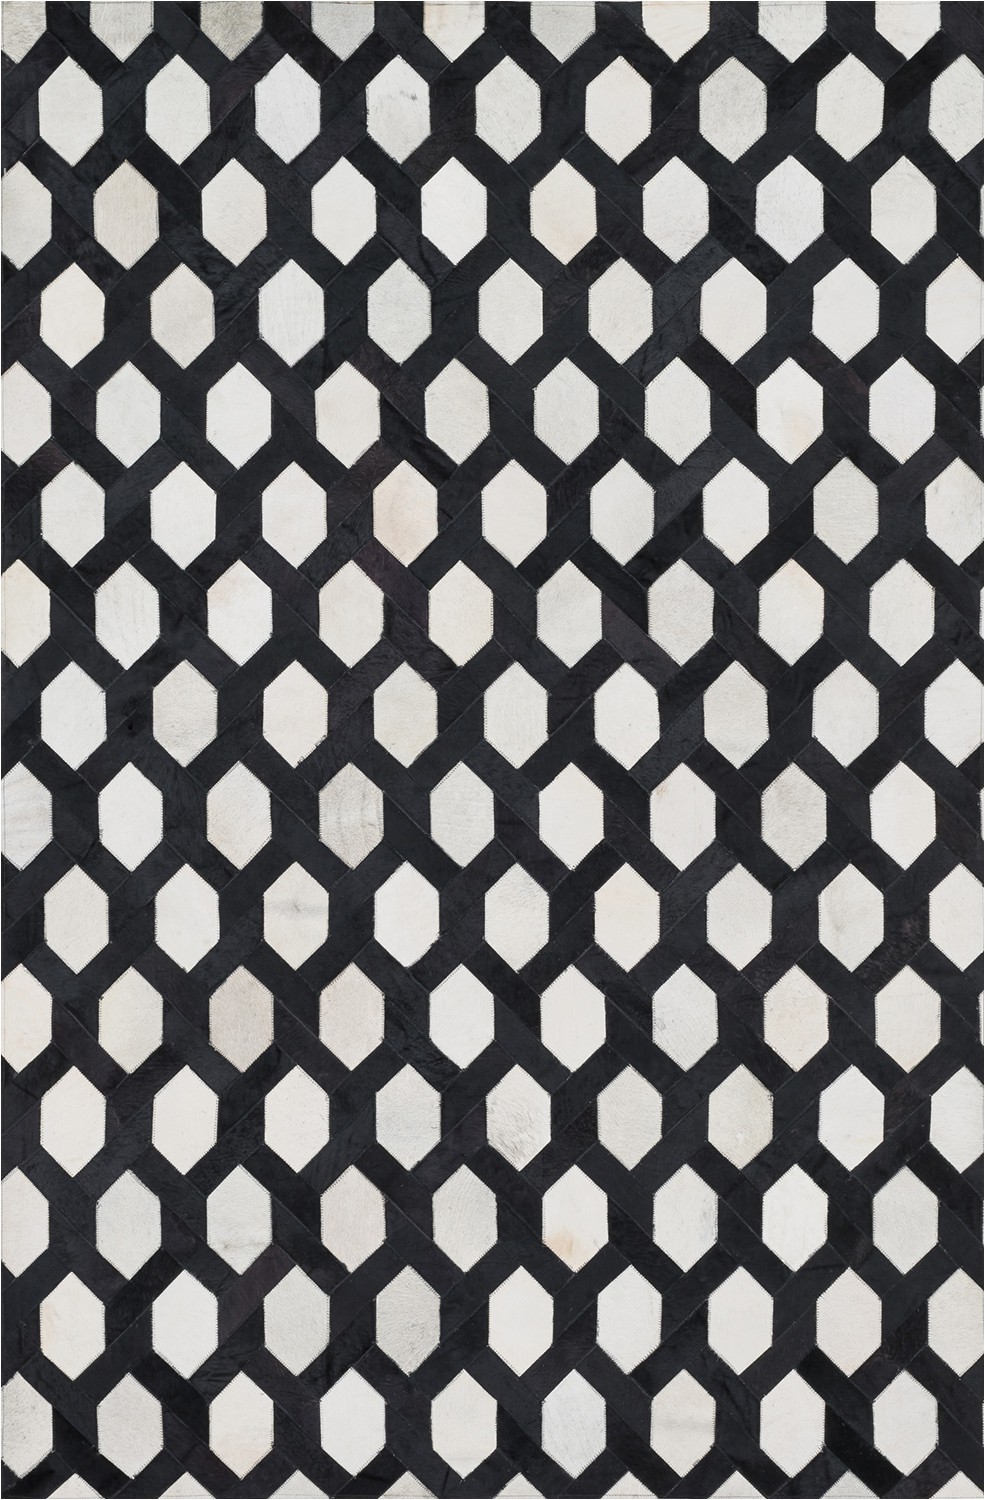 Black and White area Rugs 3×5 Black and White Rug Modernrugs